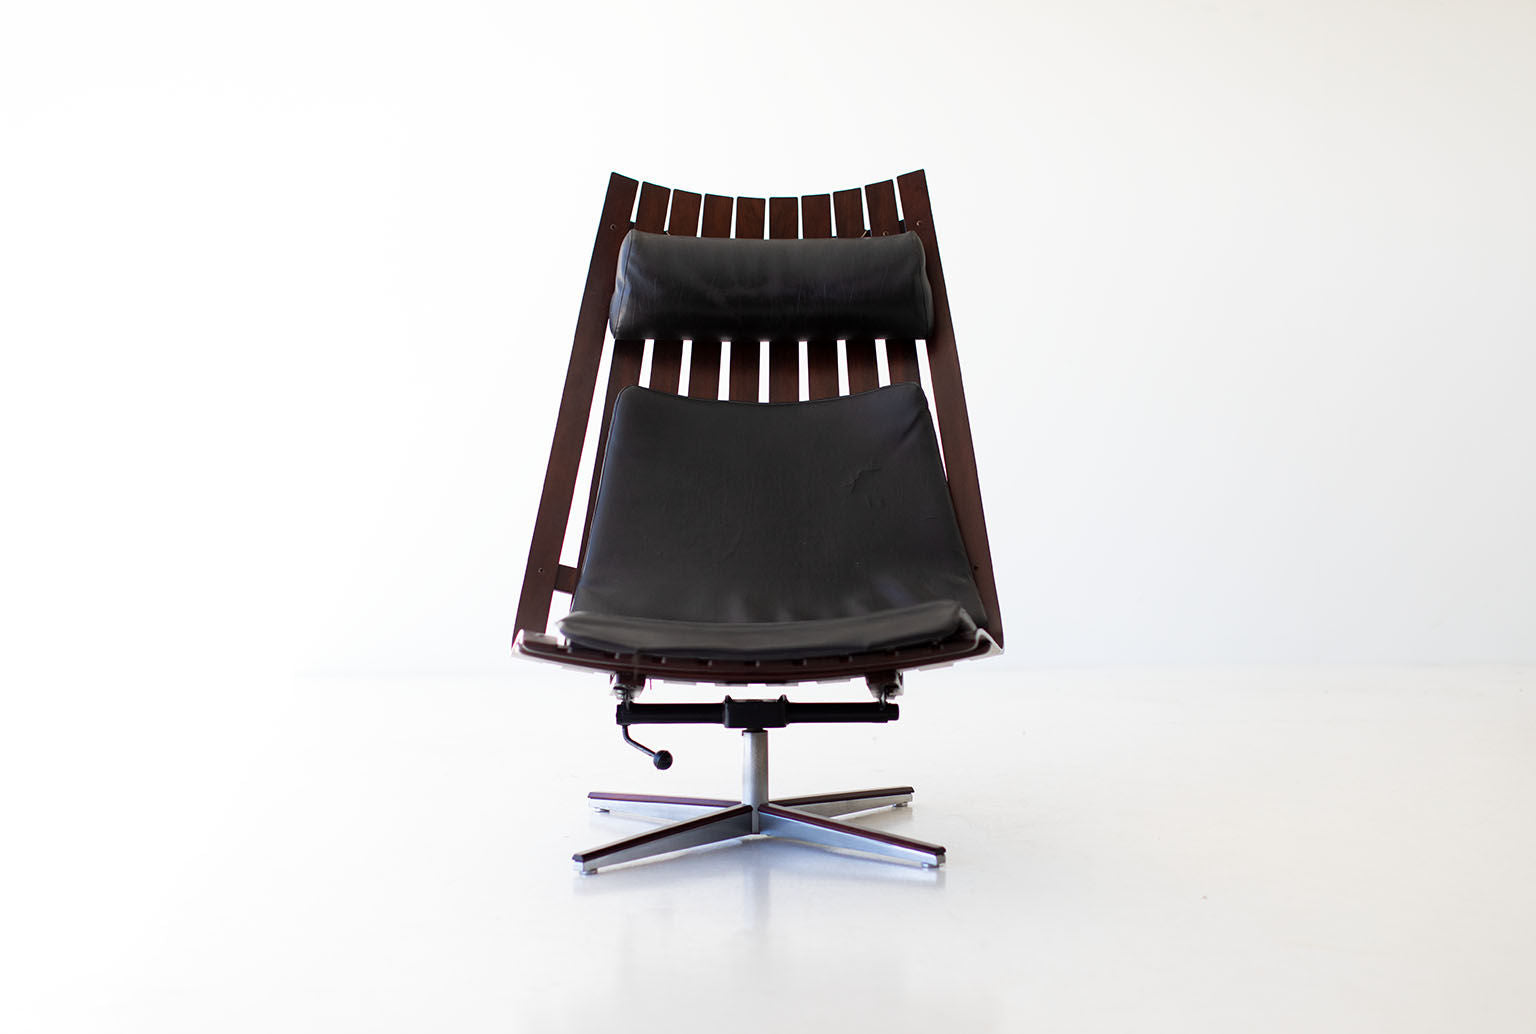 Hans Brattrud Rosewood Lounge Chair for Hove Mobler